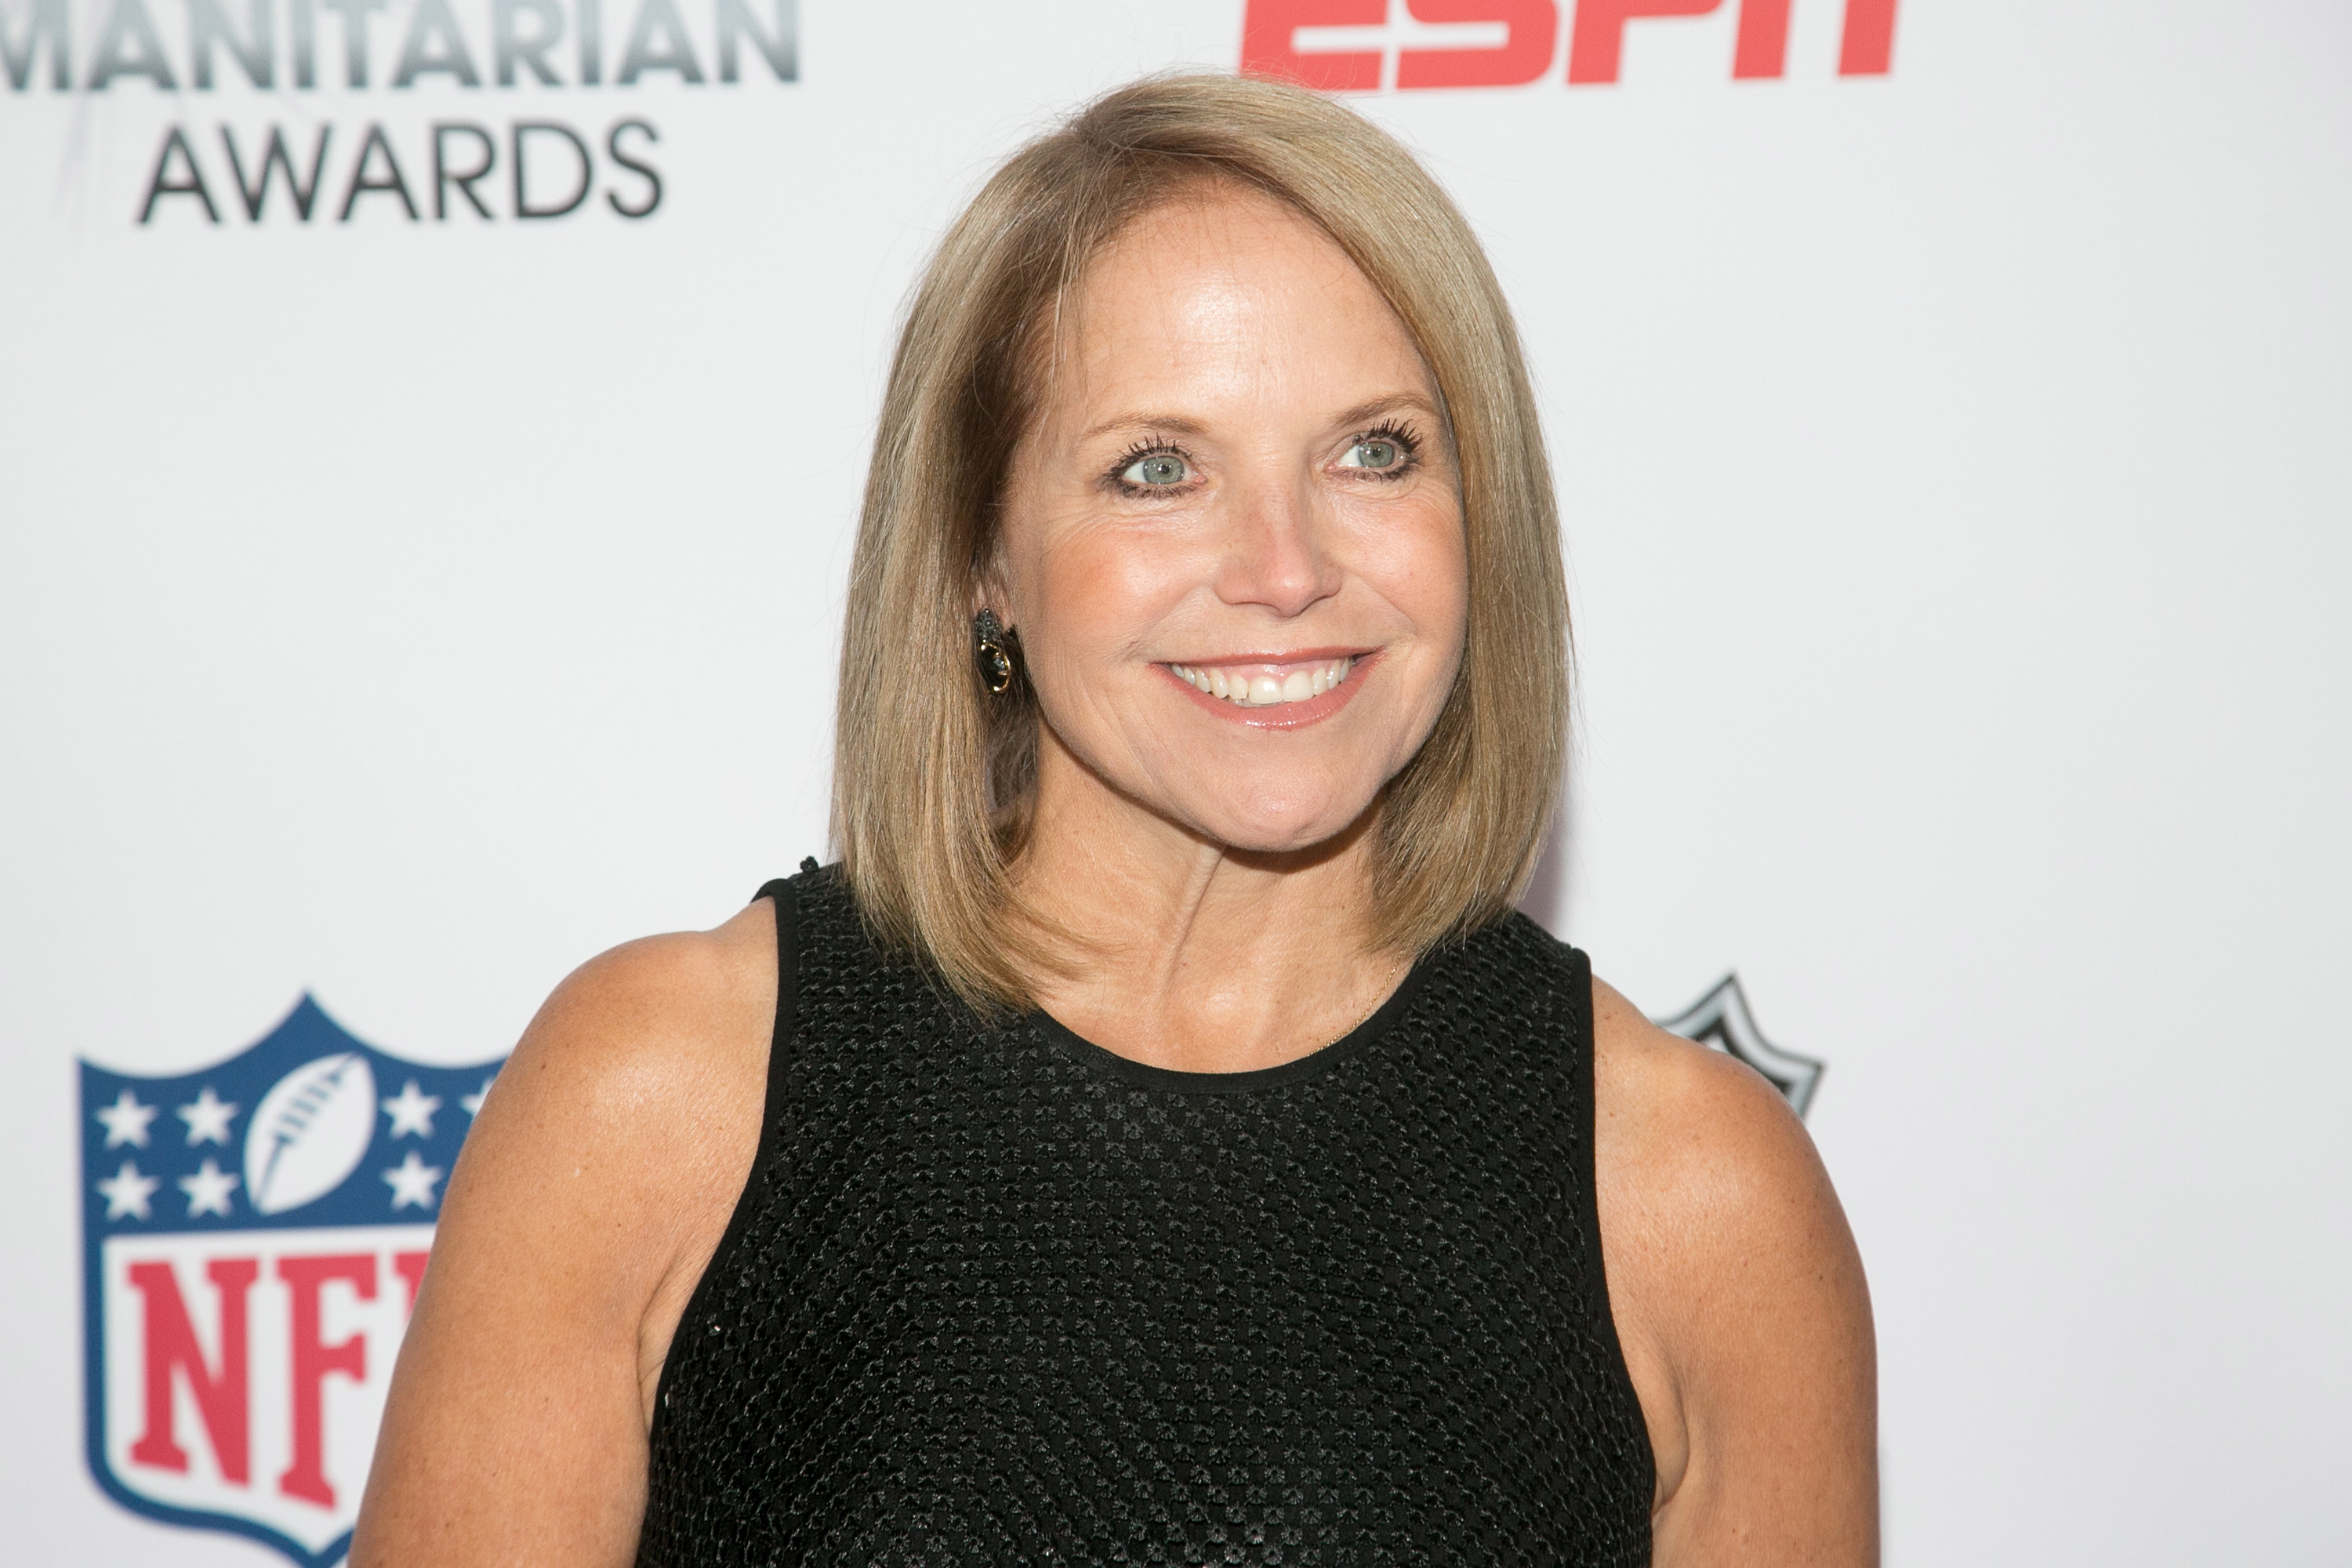 Katie Couric's New Memoir Reveals How She Overcame Hard Times